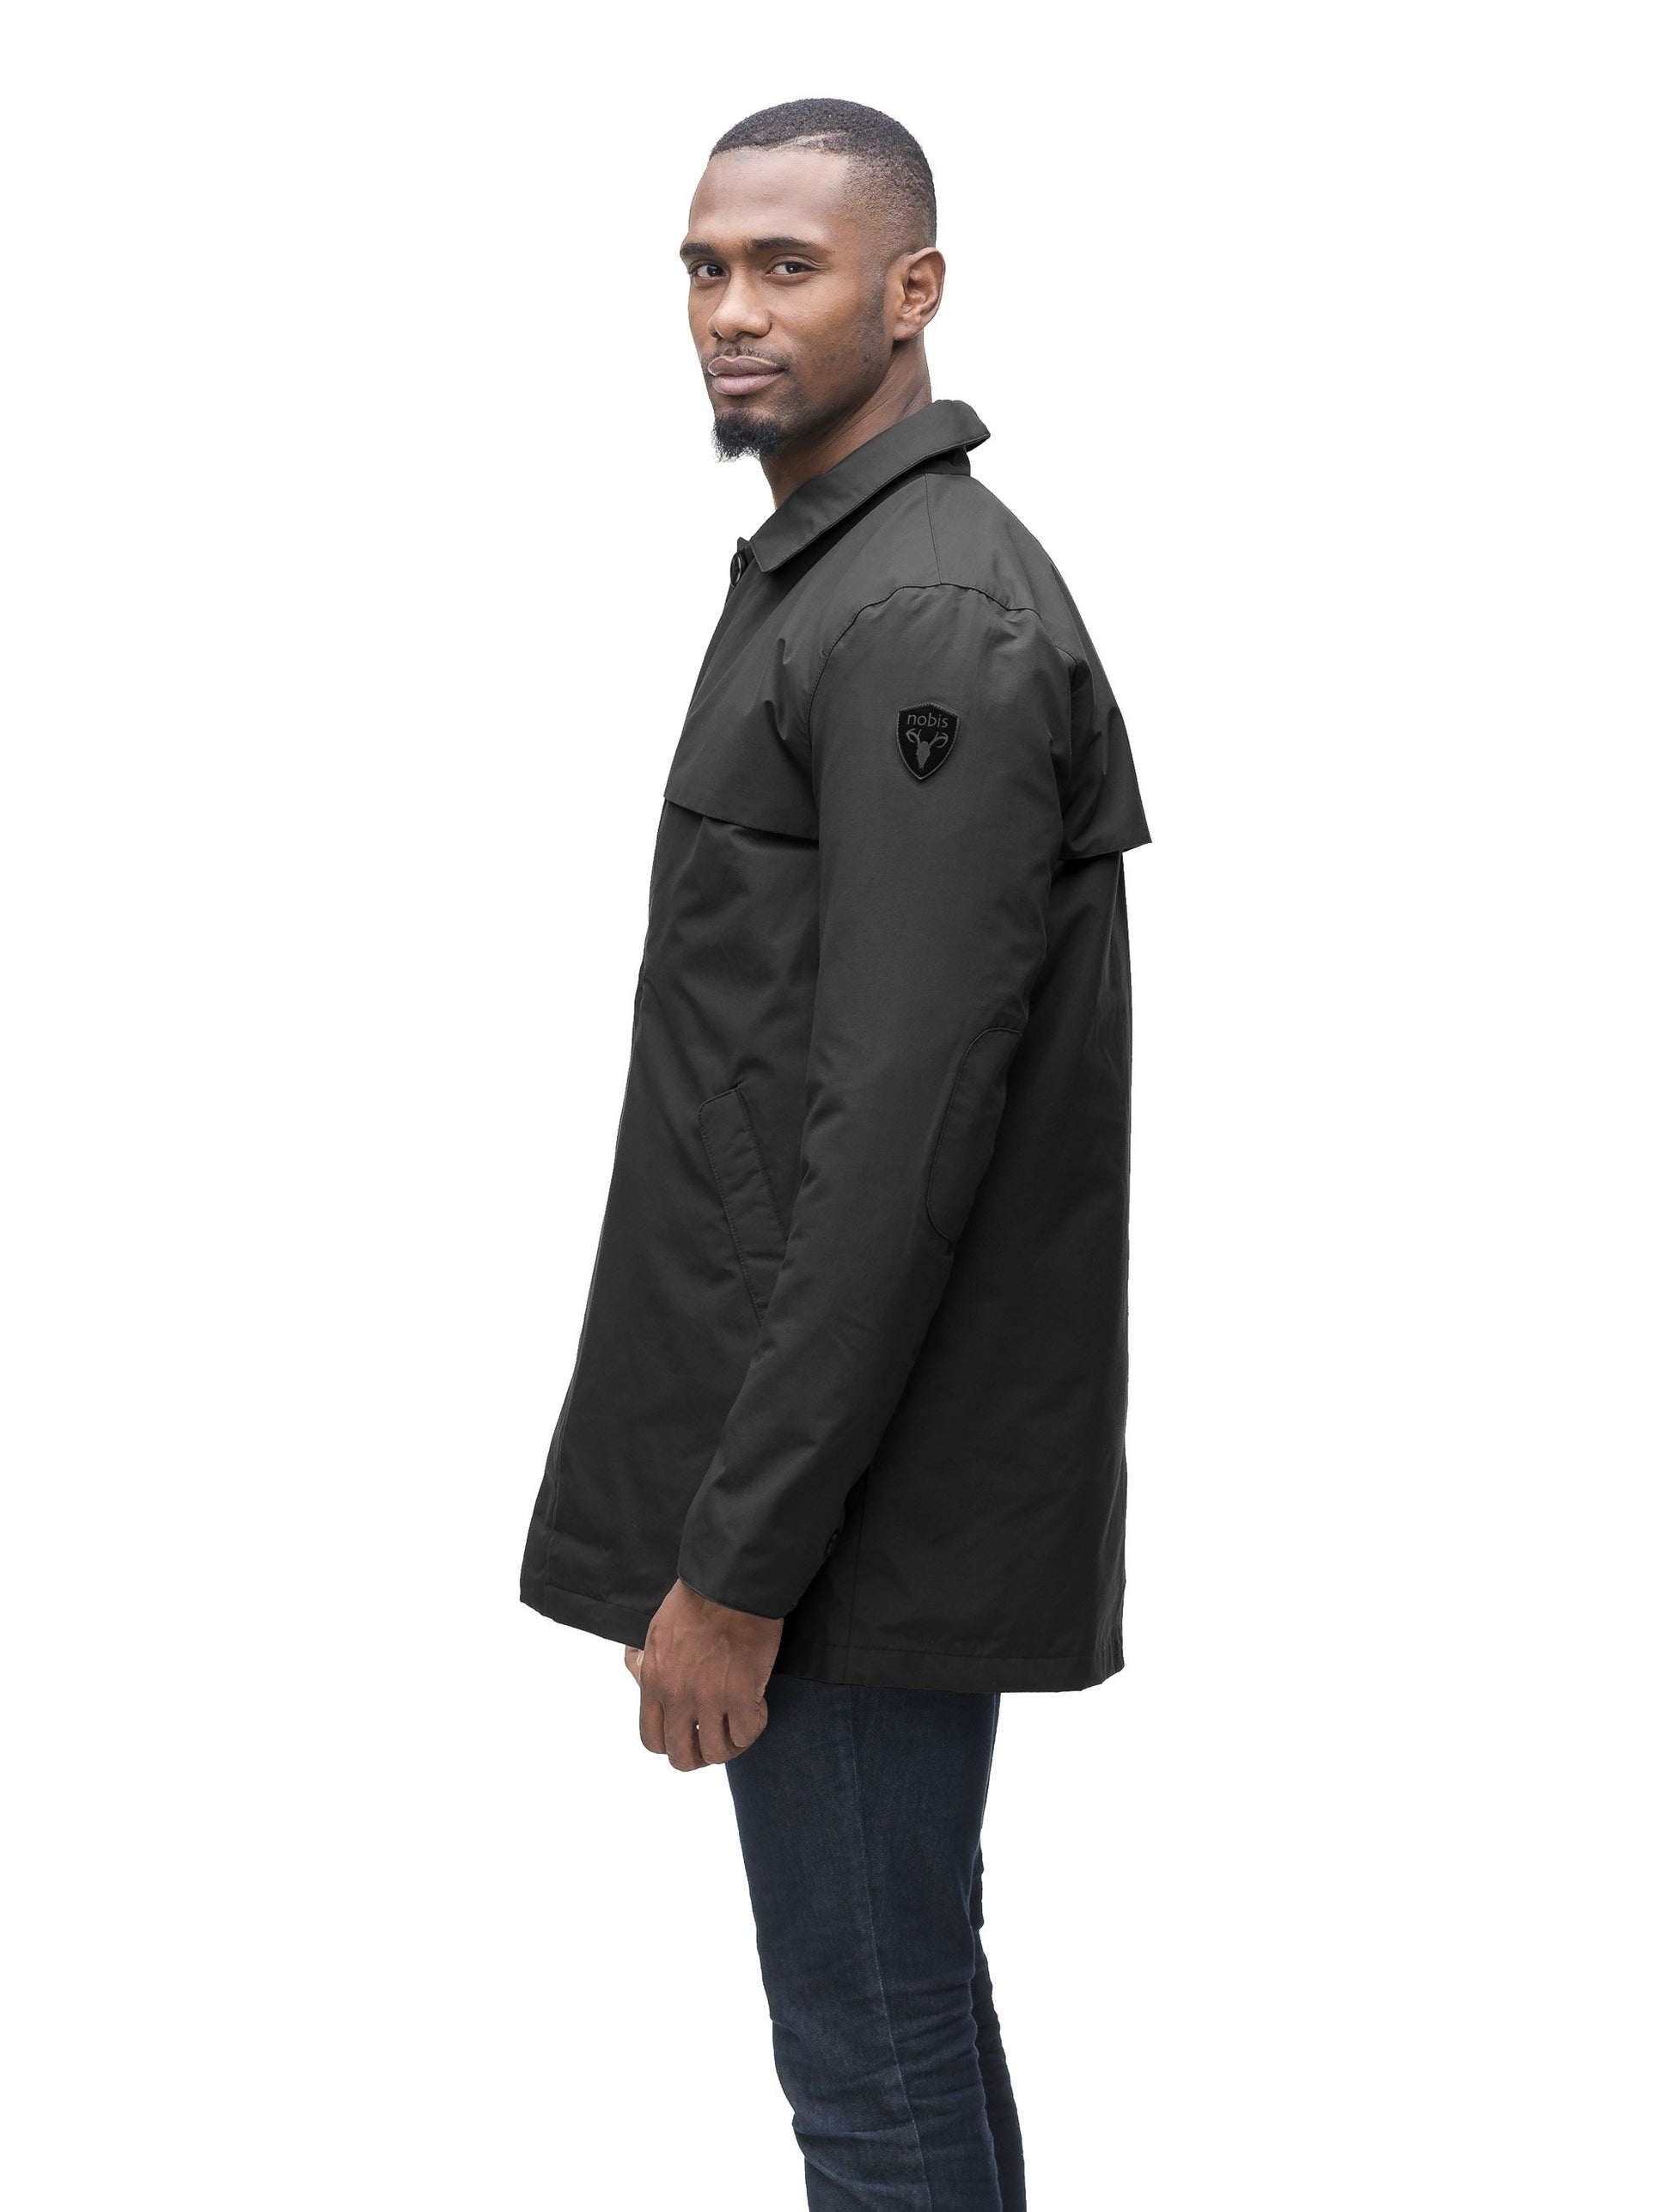 Men's waist length raincoat with a magnetic placket and top button detail in Black